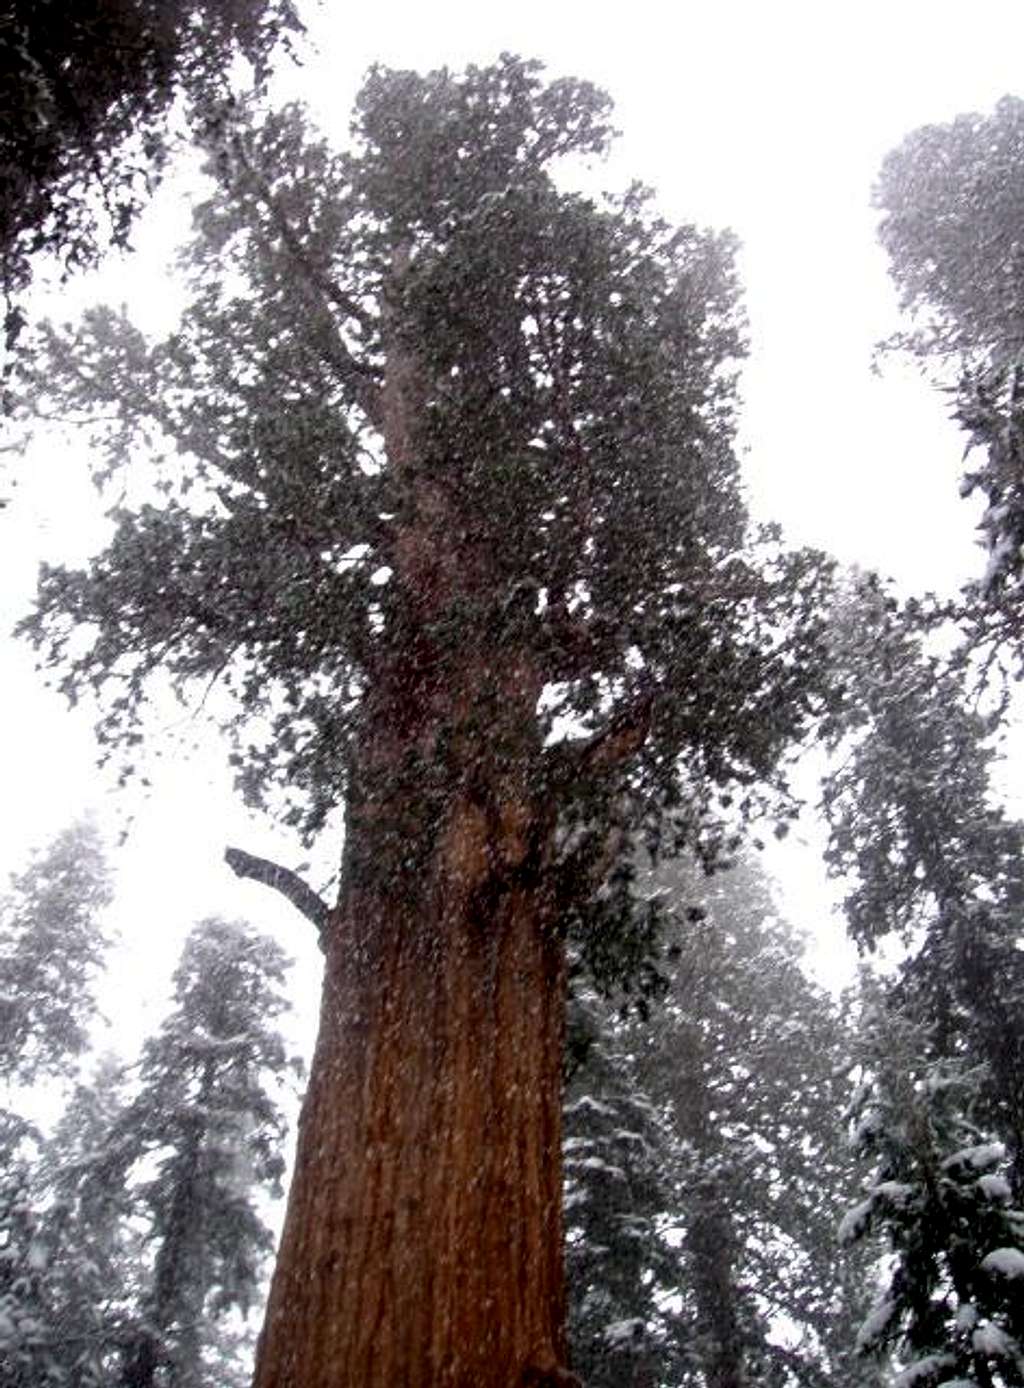 Snow falling on the largest tree in the world